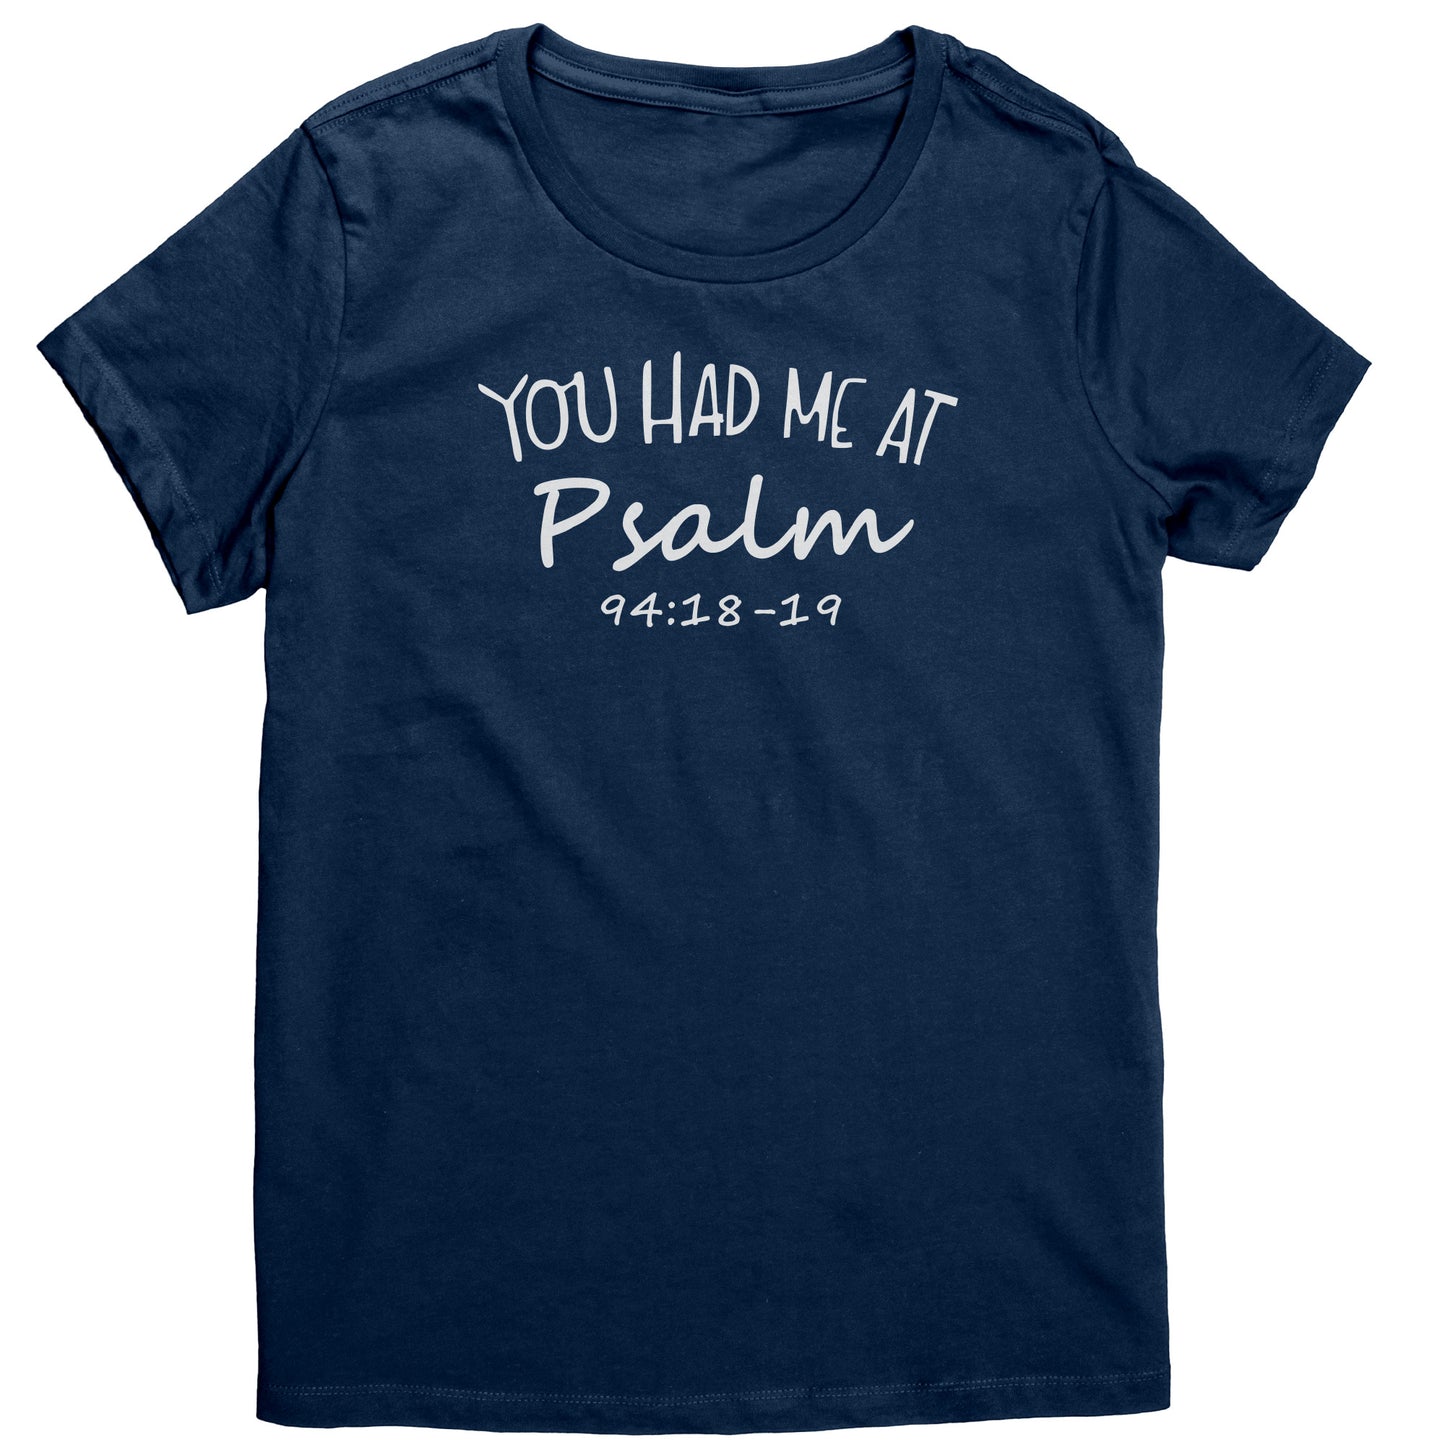 You Had Me At Psalm 94:18-19 Women's T-Shirt Part 2